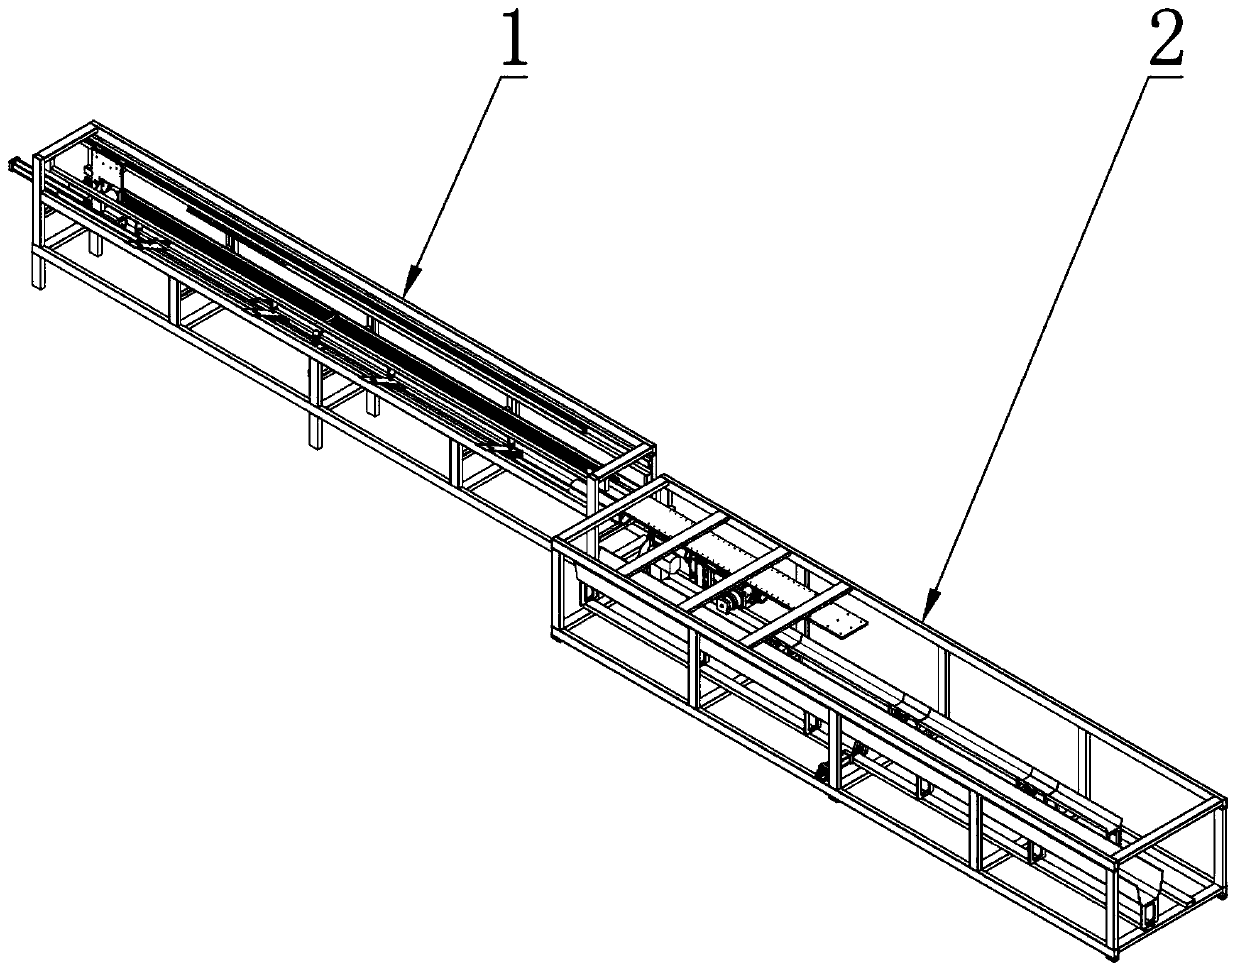 A mechanical device for automatically cutting steel bars